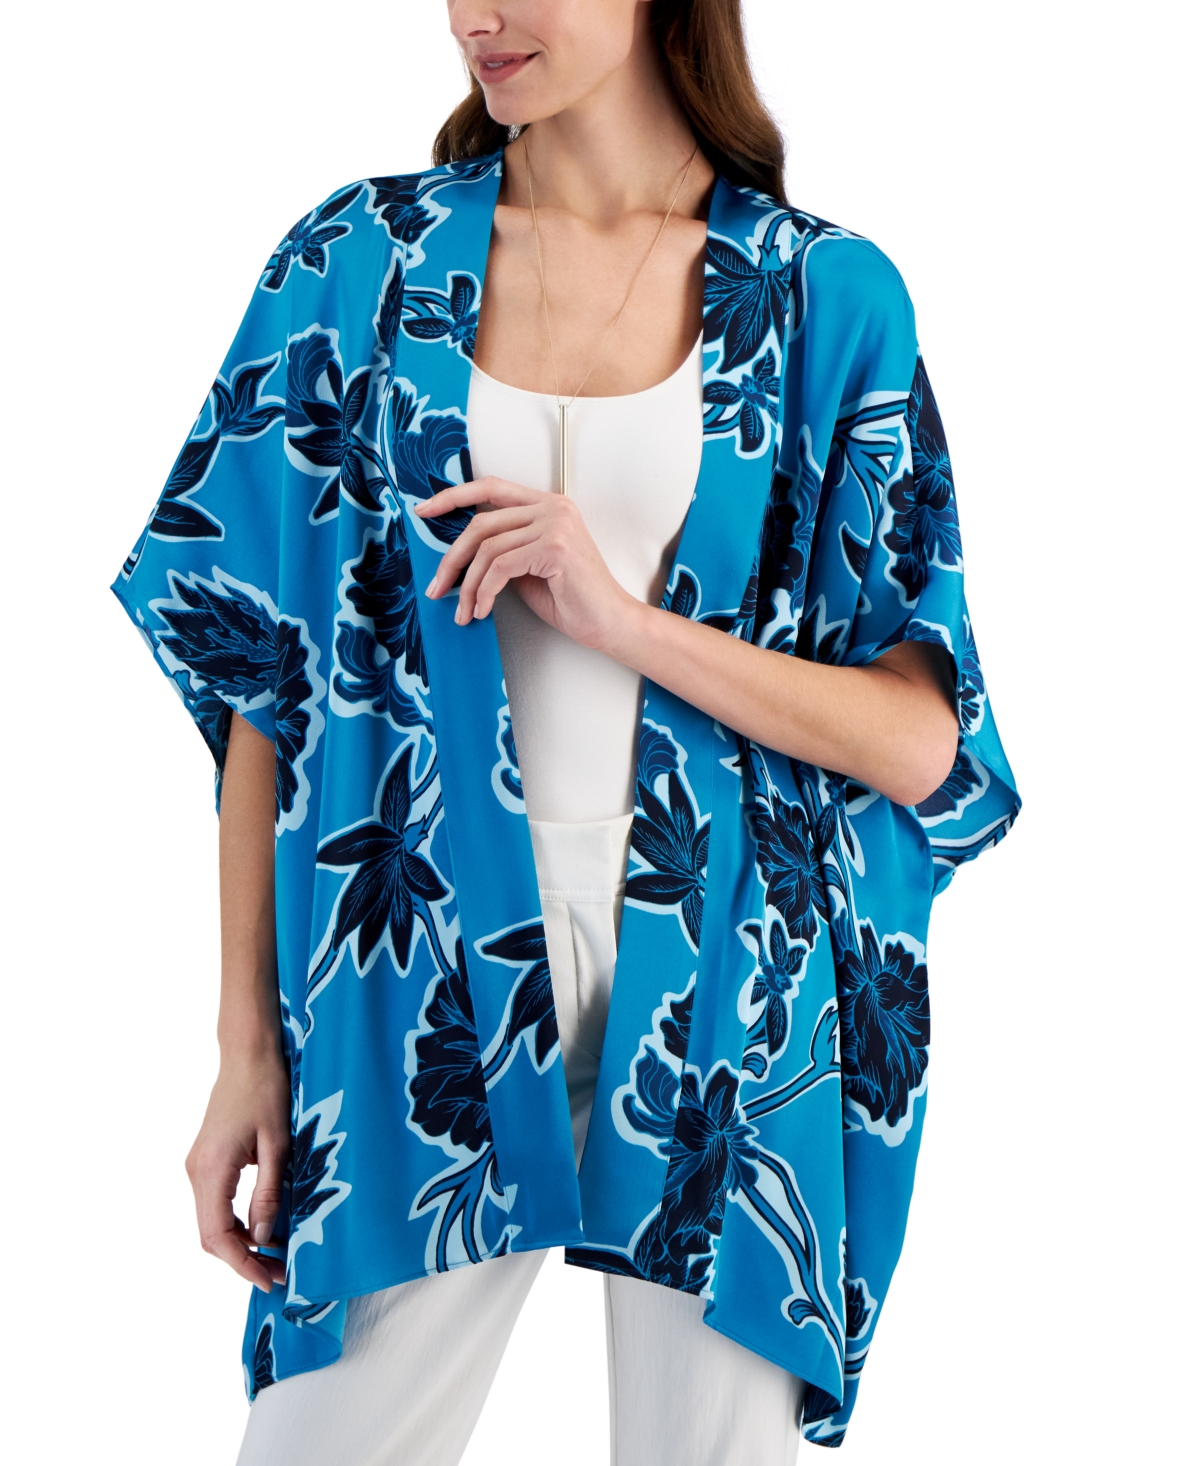 Women's Floral-Print Open-Front Kimono Jacket, Created for Macy's - Seafrost Combo